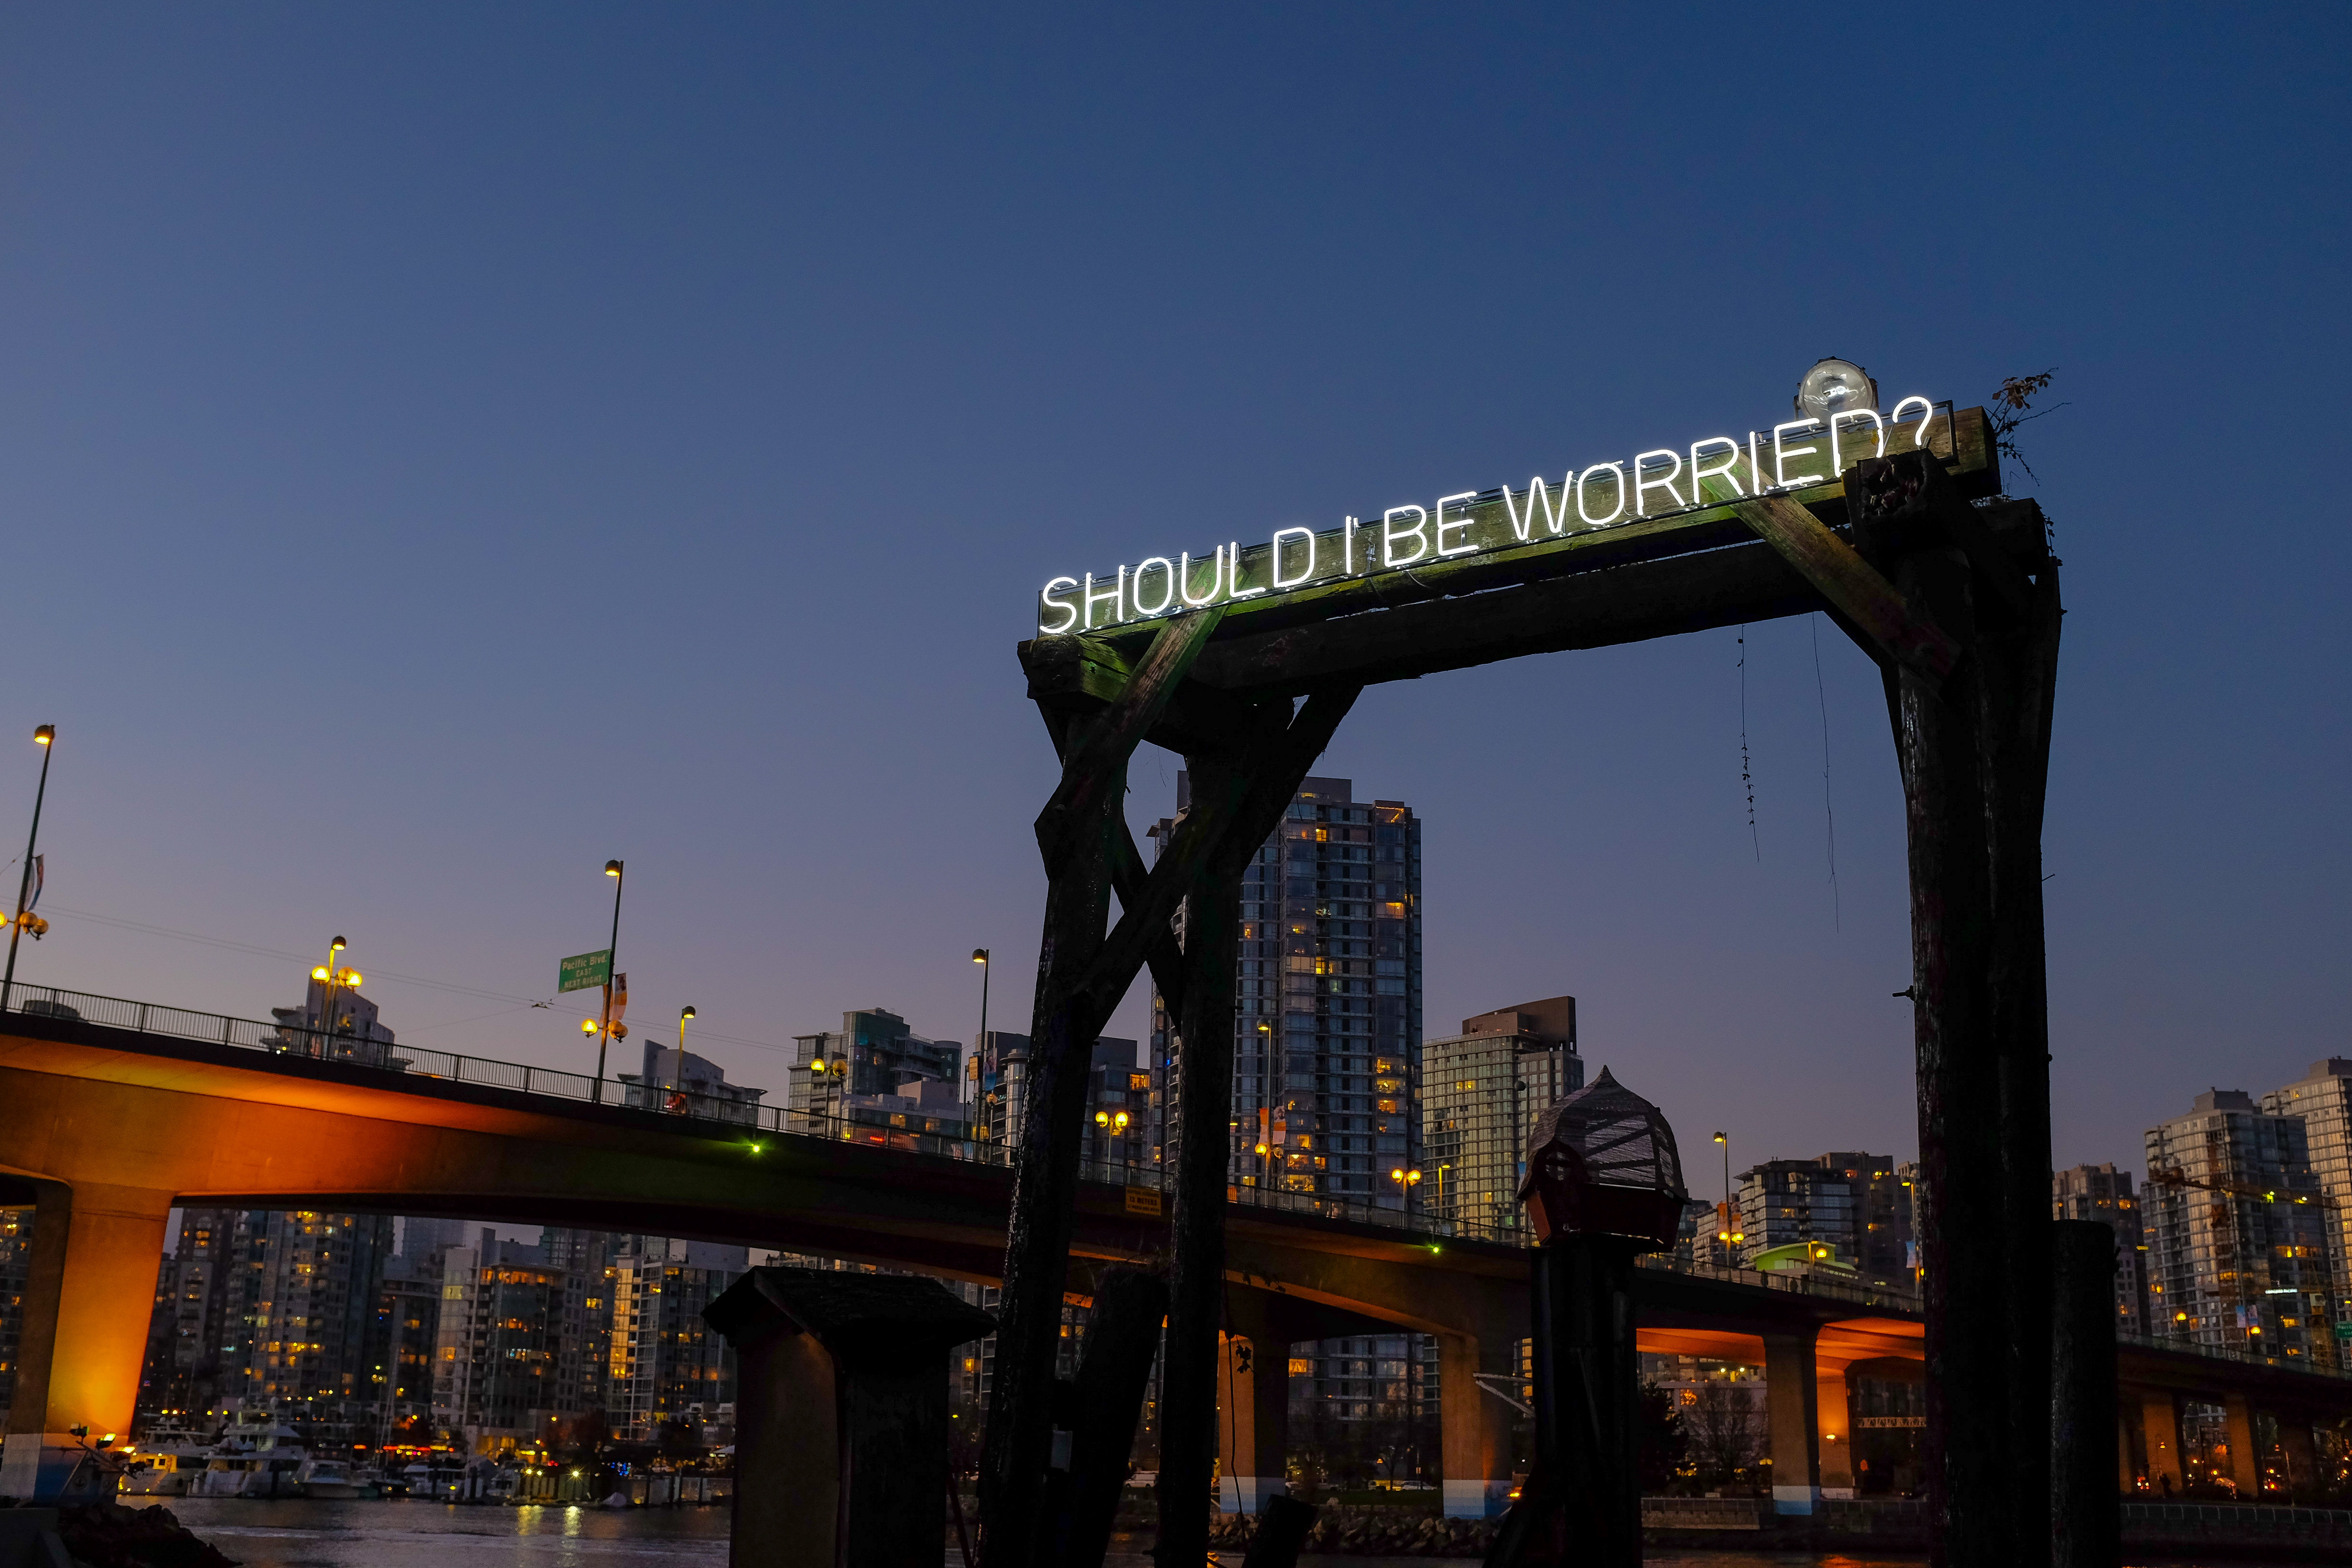 Should I Be Worried - Neon Sign installed along False Creek in Vancouver